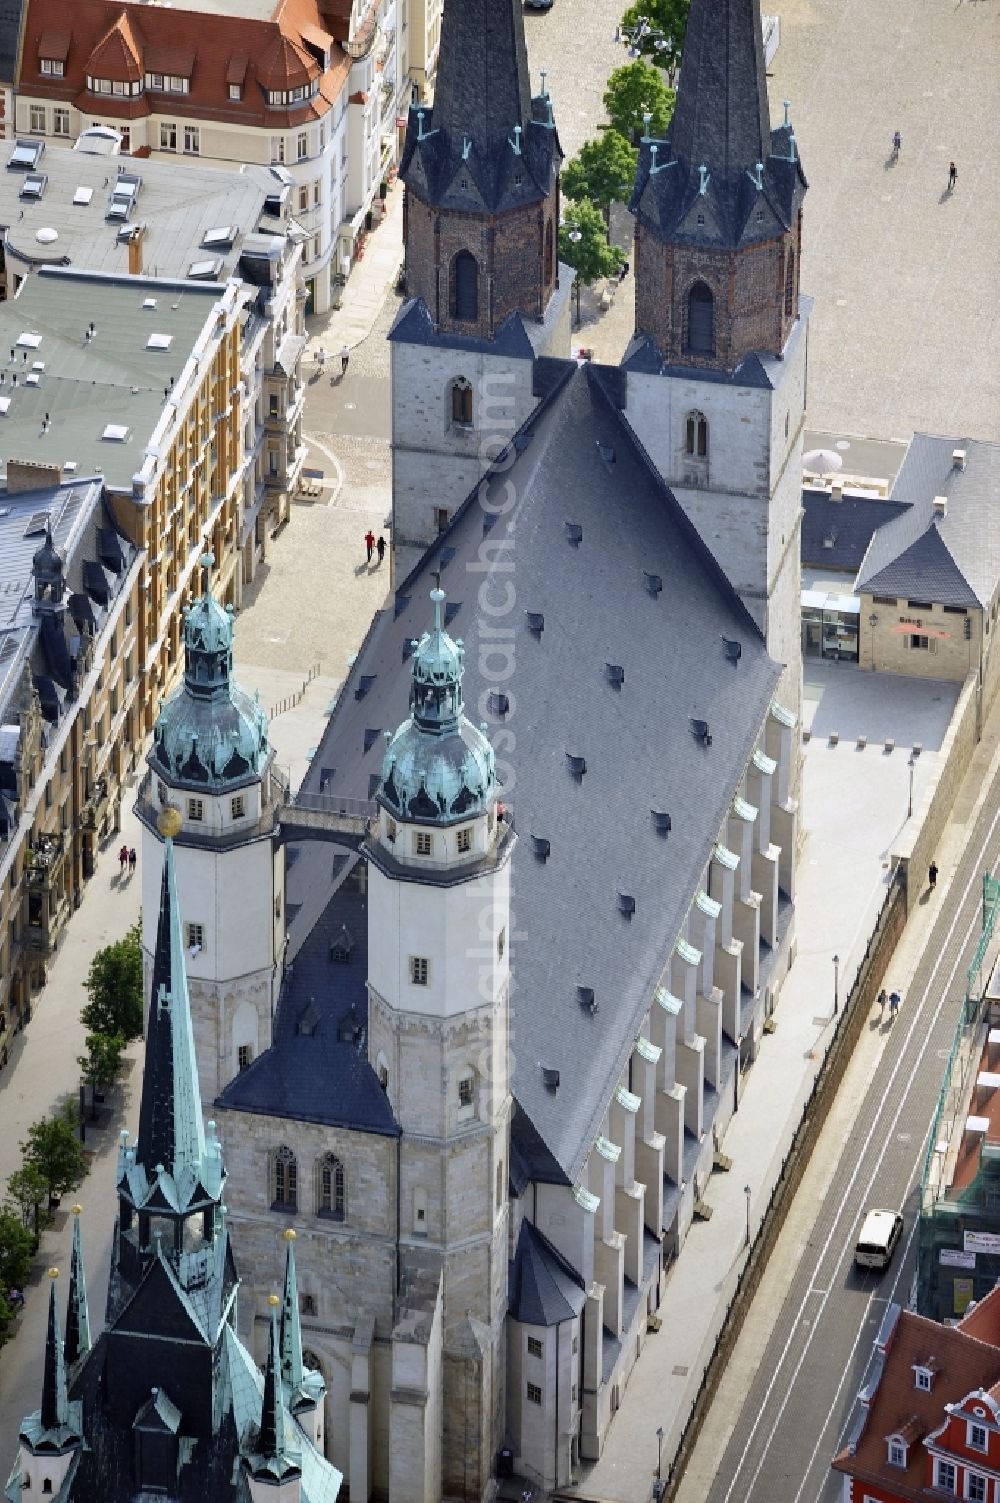 Aerial image Halle - The old town area of St. Mary's Church from the Red Tower at Market Square in the center of Halle (Saale)